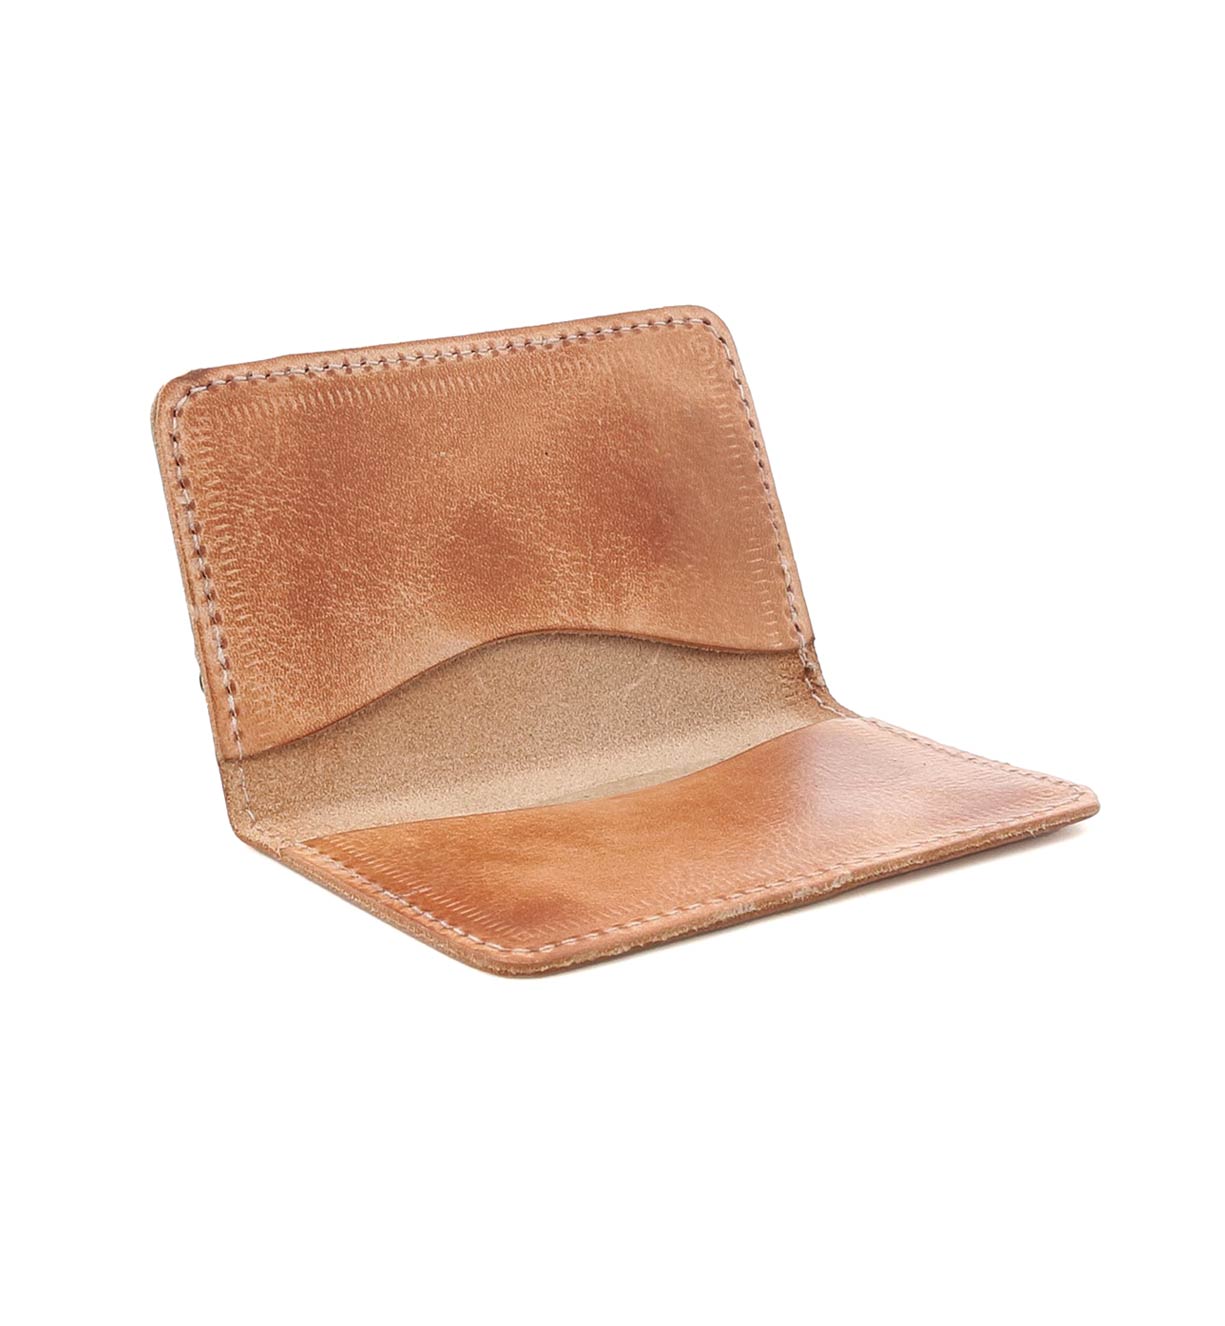 A Heston leather wallet by Bed Stu on a white background.